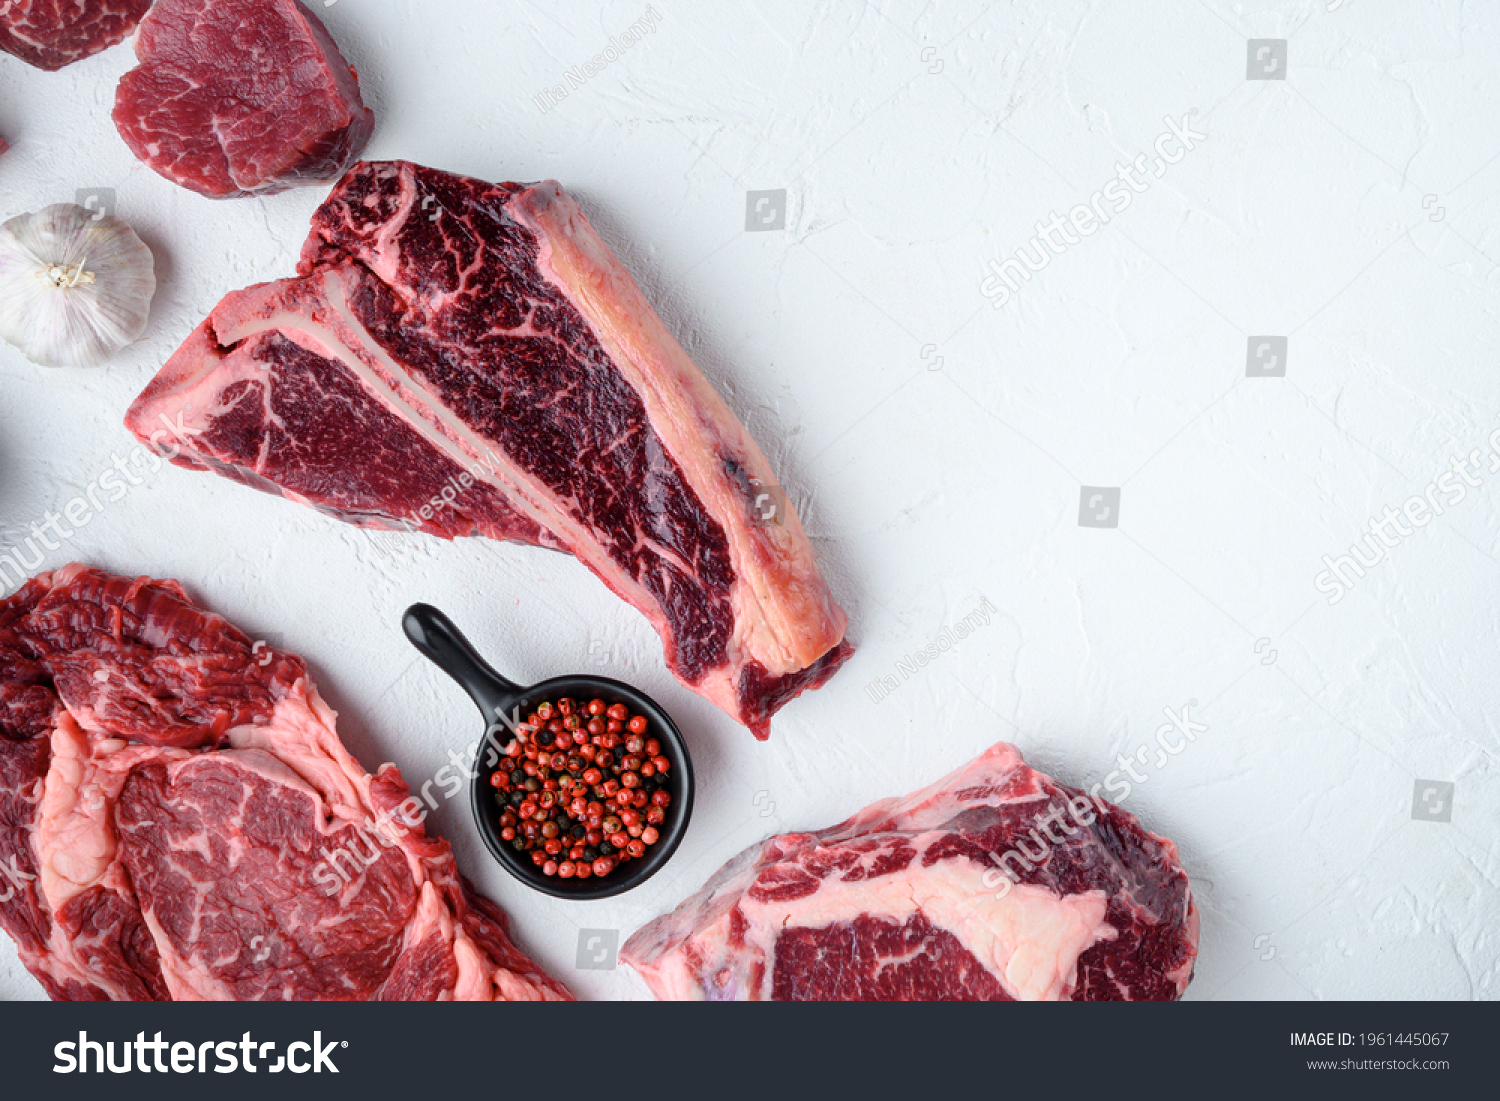 Various cuts of marbled beef meat and dry aged steaks set, tomahawk, t bone, club steak, rib eye and tenderloin cuts, on white stone background, top view flat lay, with copy space for text #1961445067